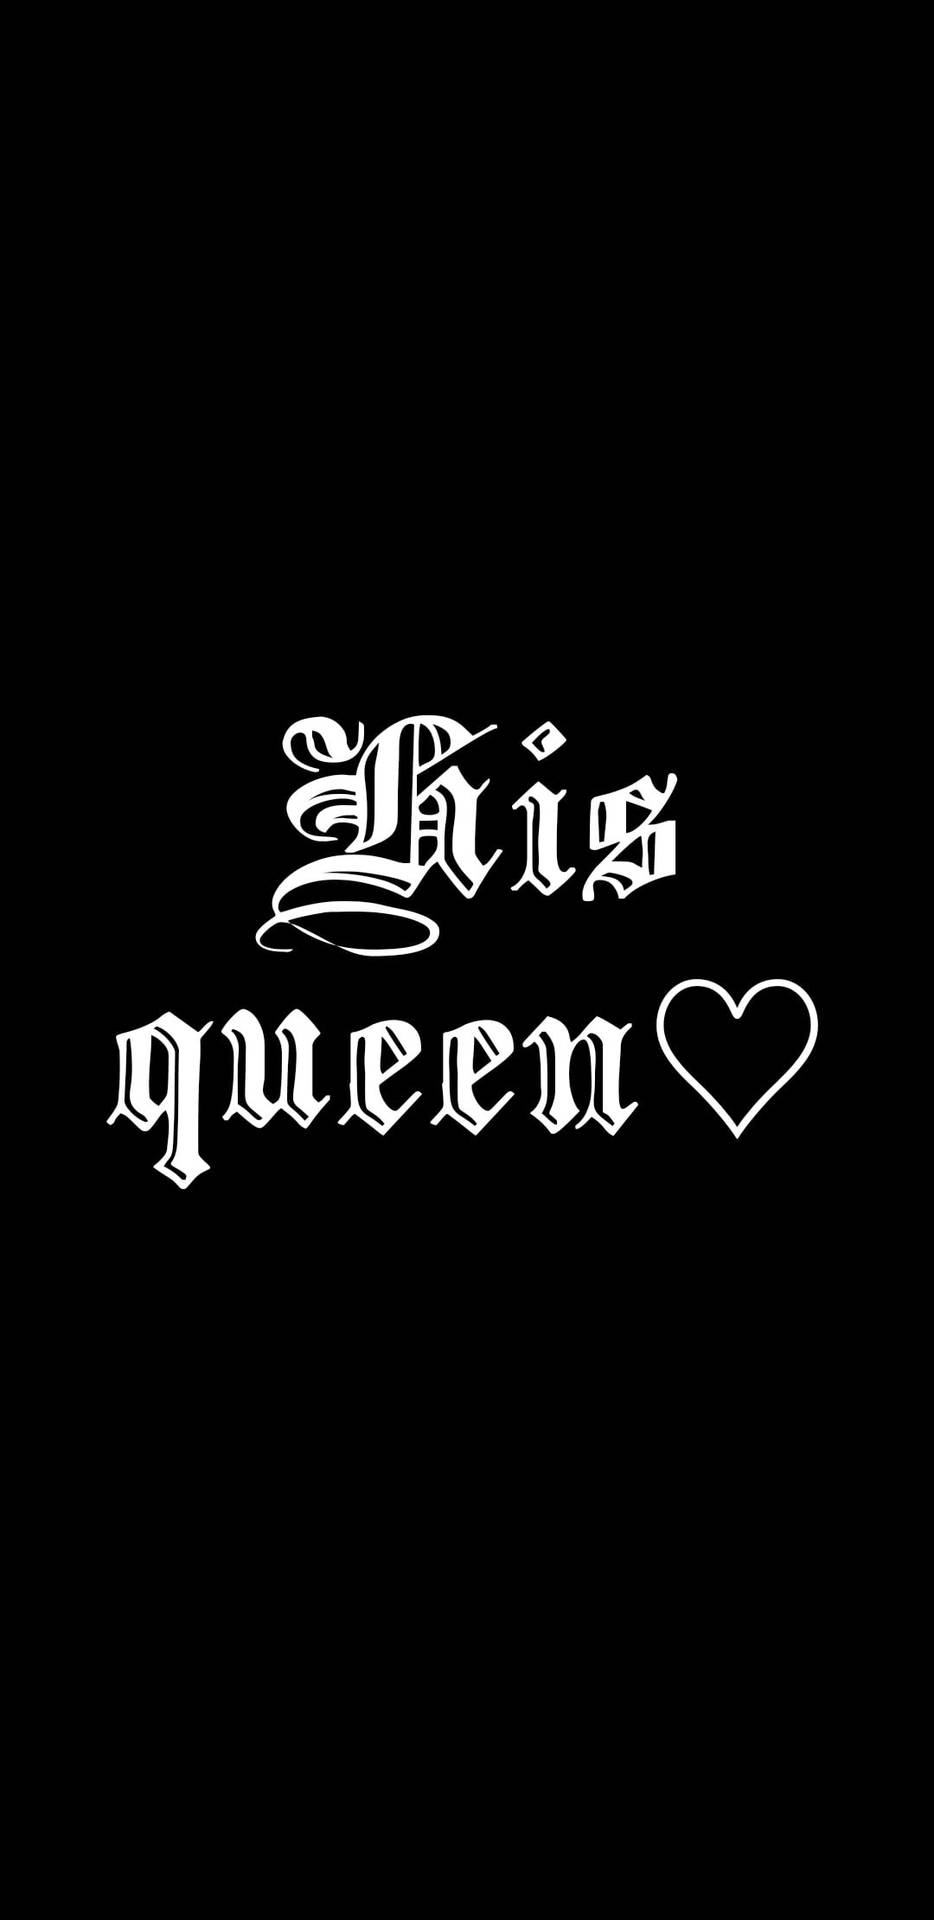 Black Queen Background With Heart